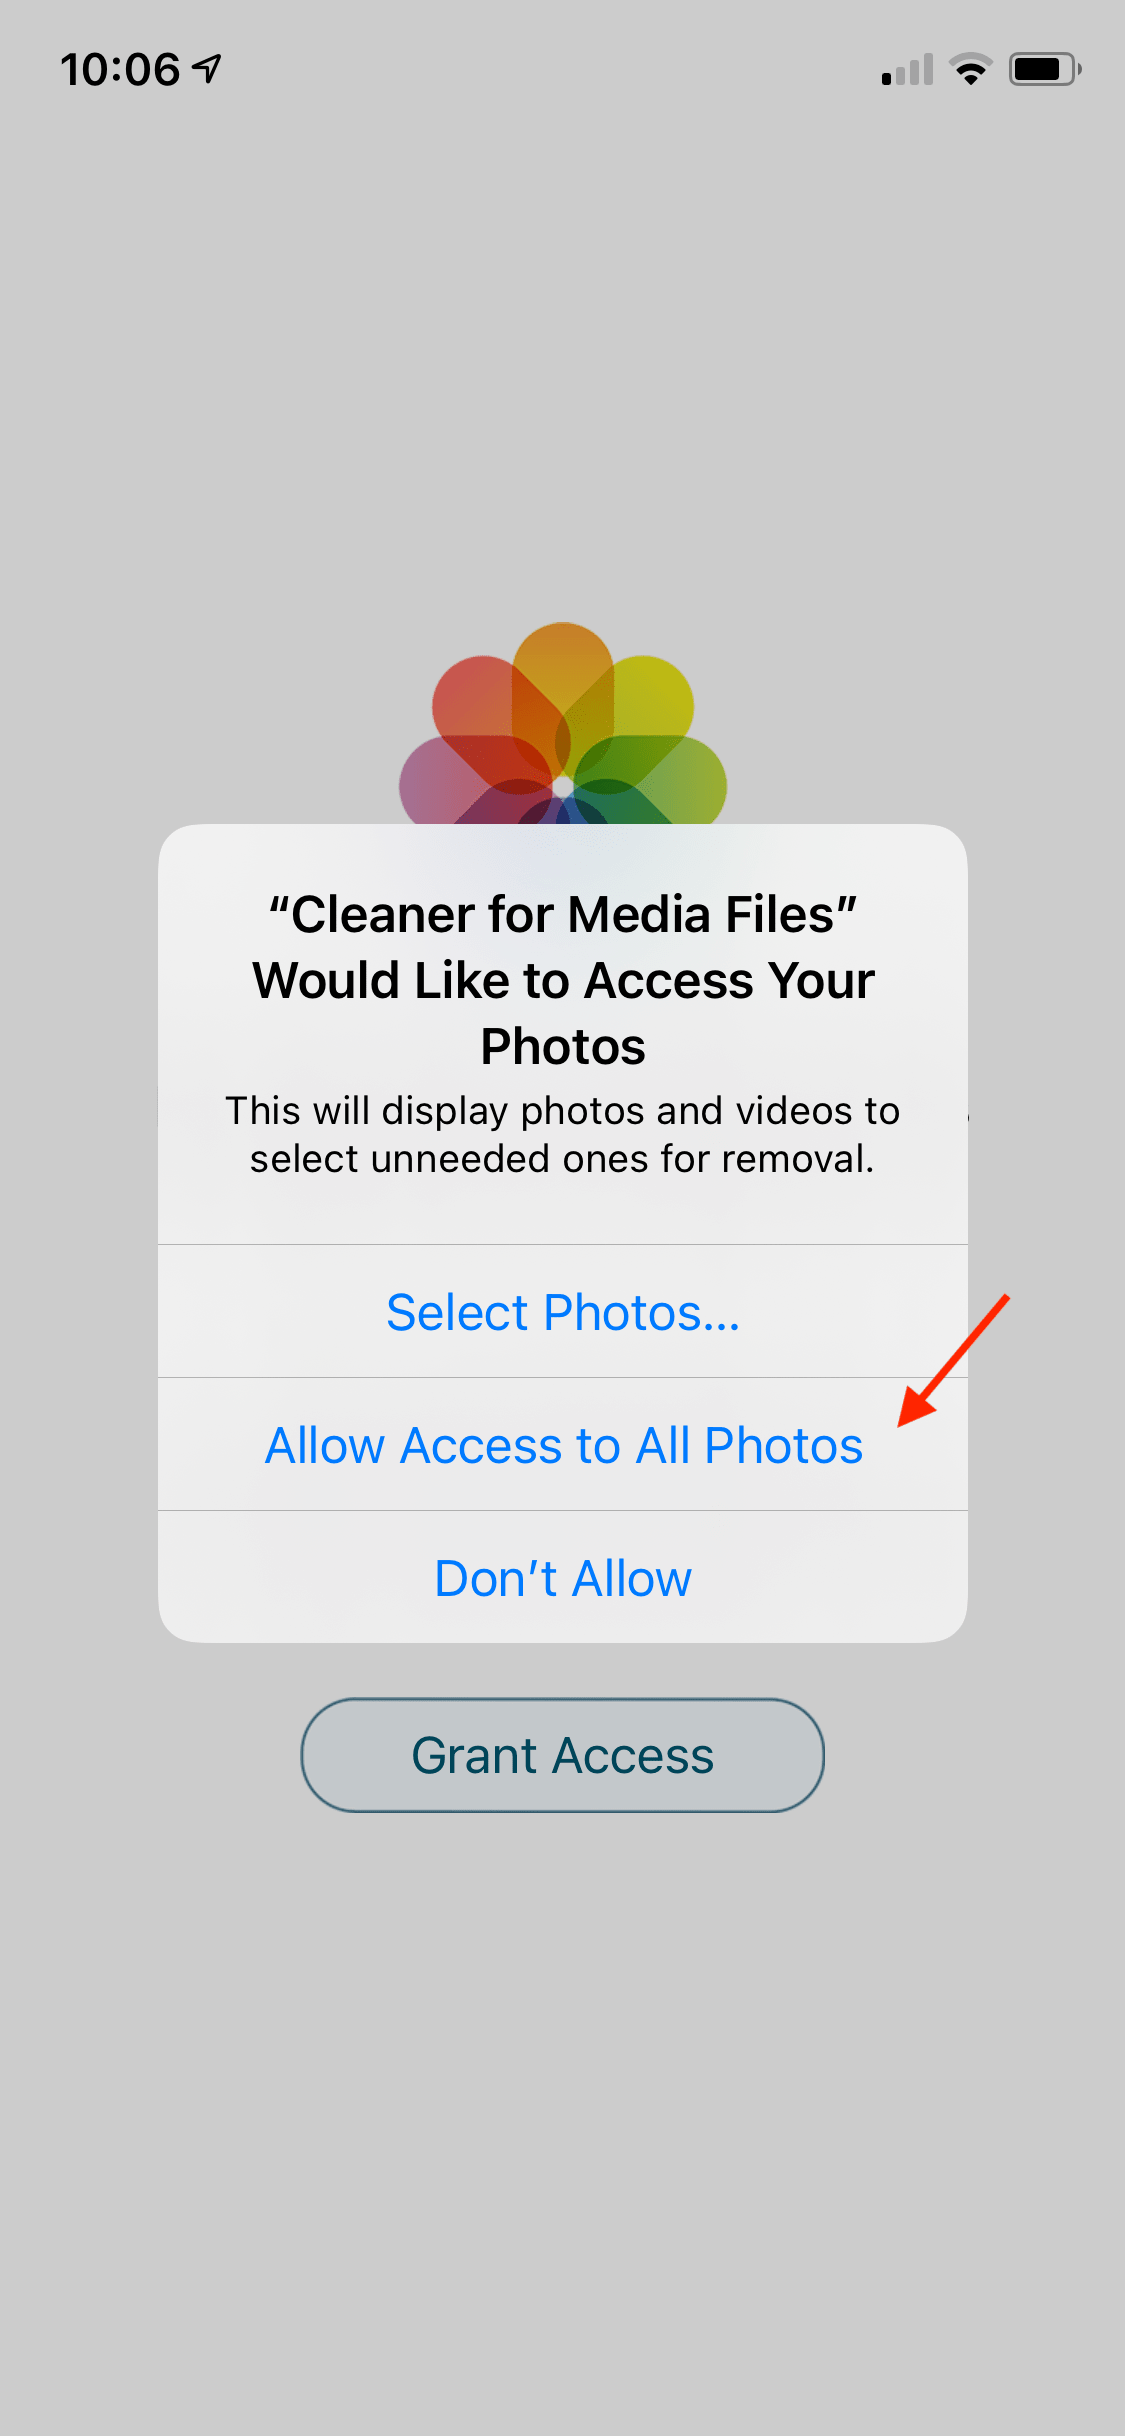 phone cleaner allow grant access